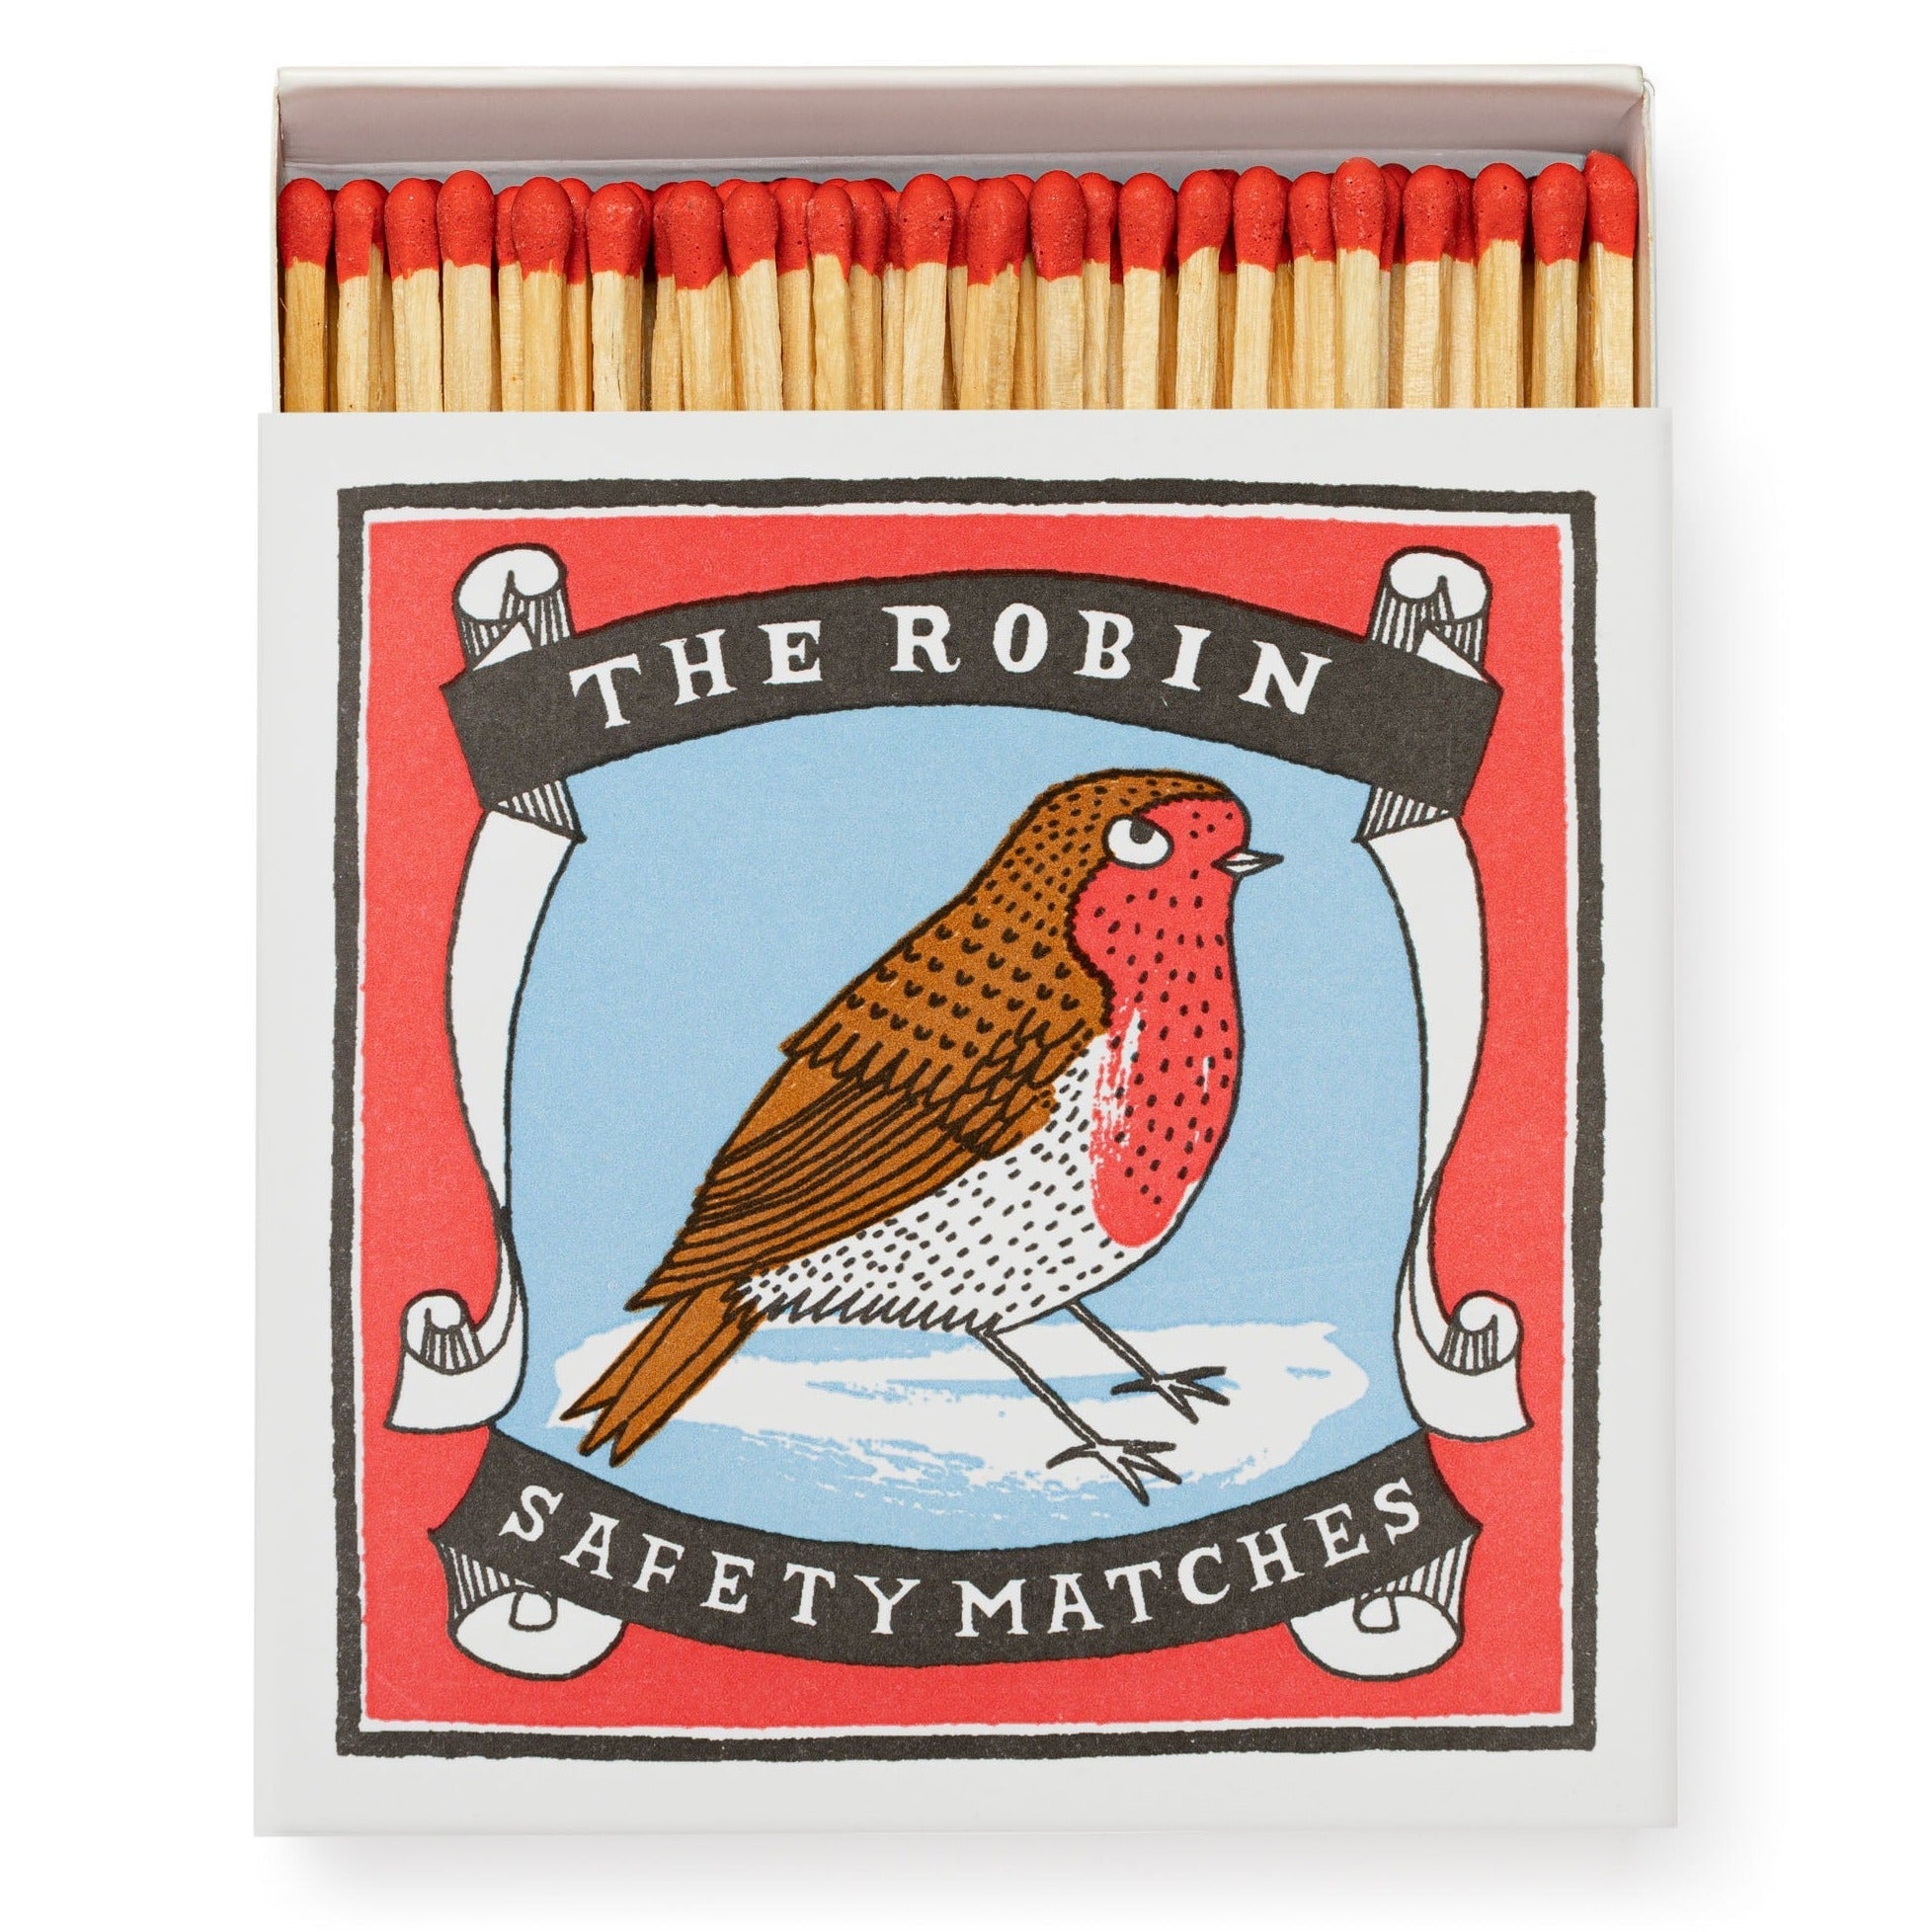 Luxury Matches - The Robin - Life of Riley